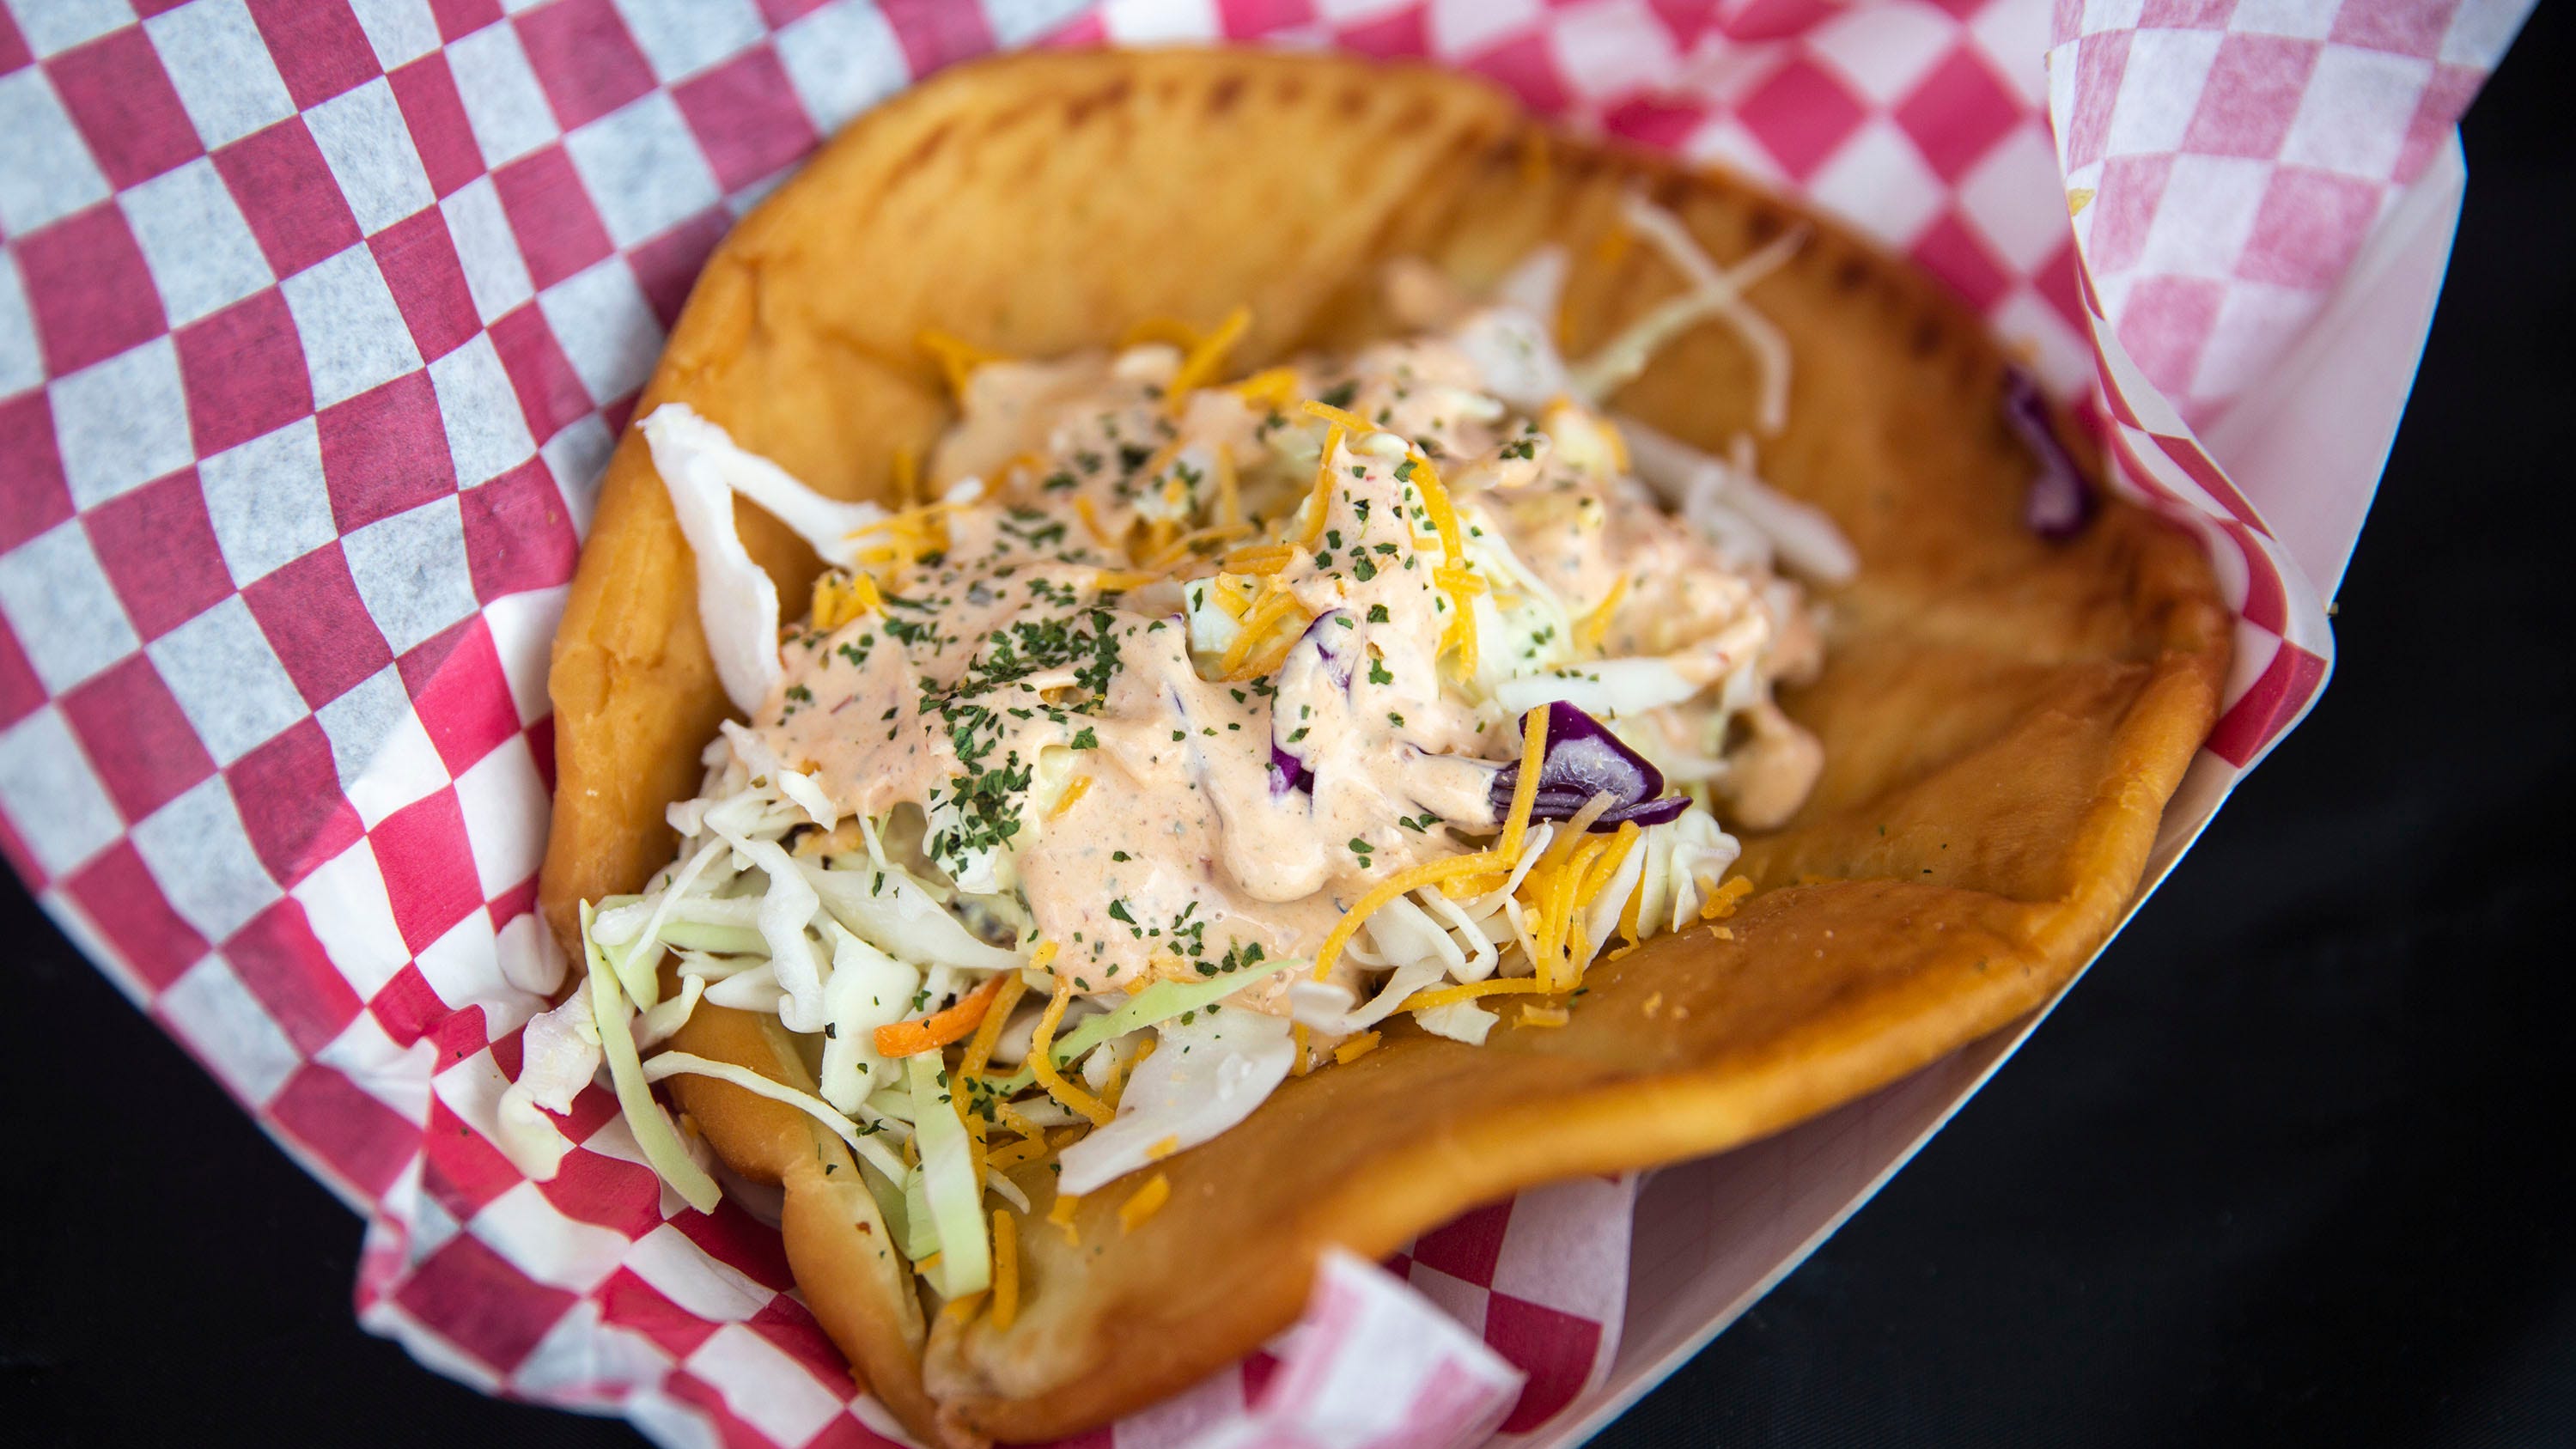 Get a taste of the best new food at the 2021 Iowa State Fair